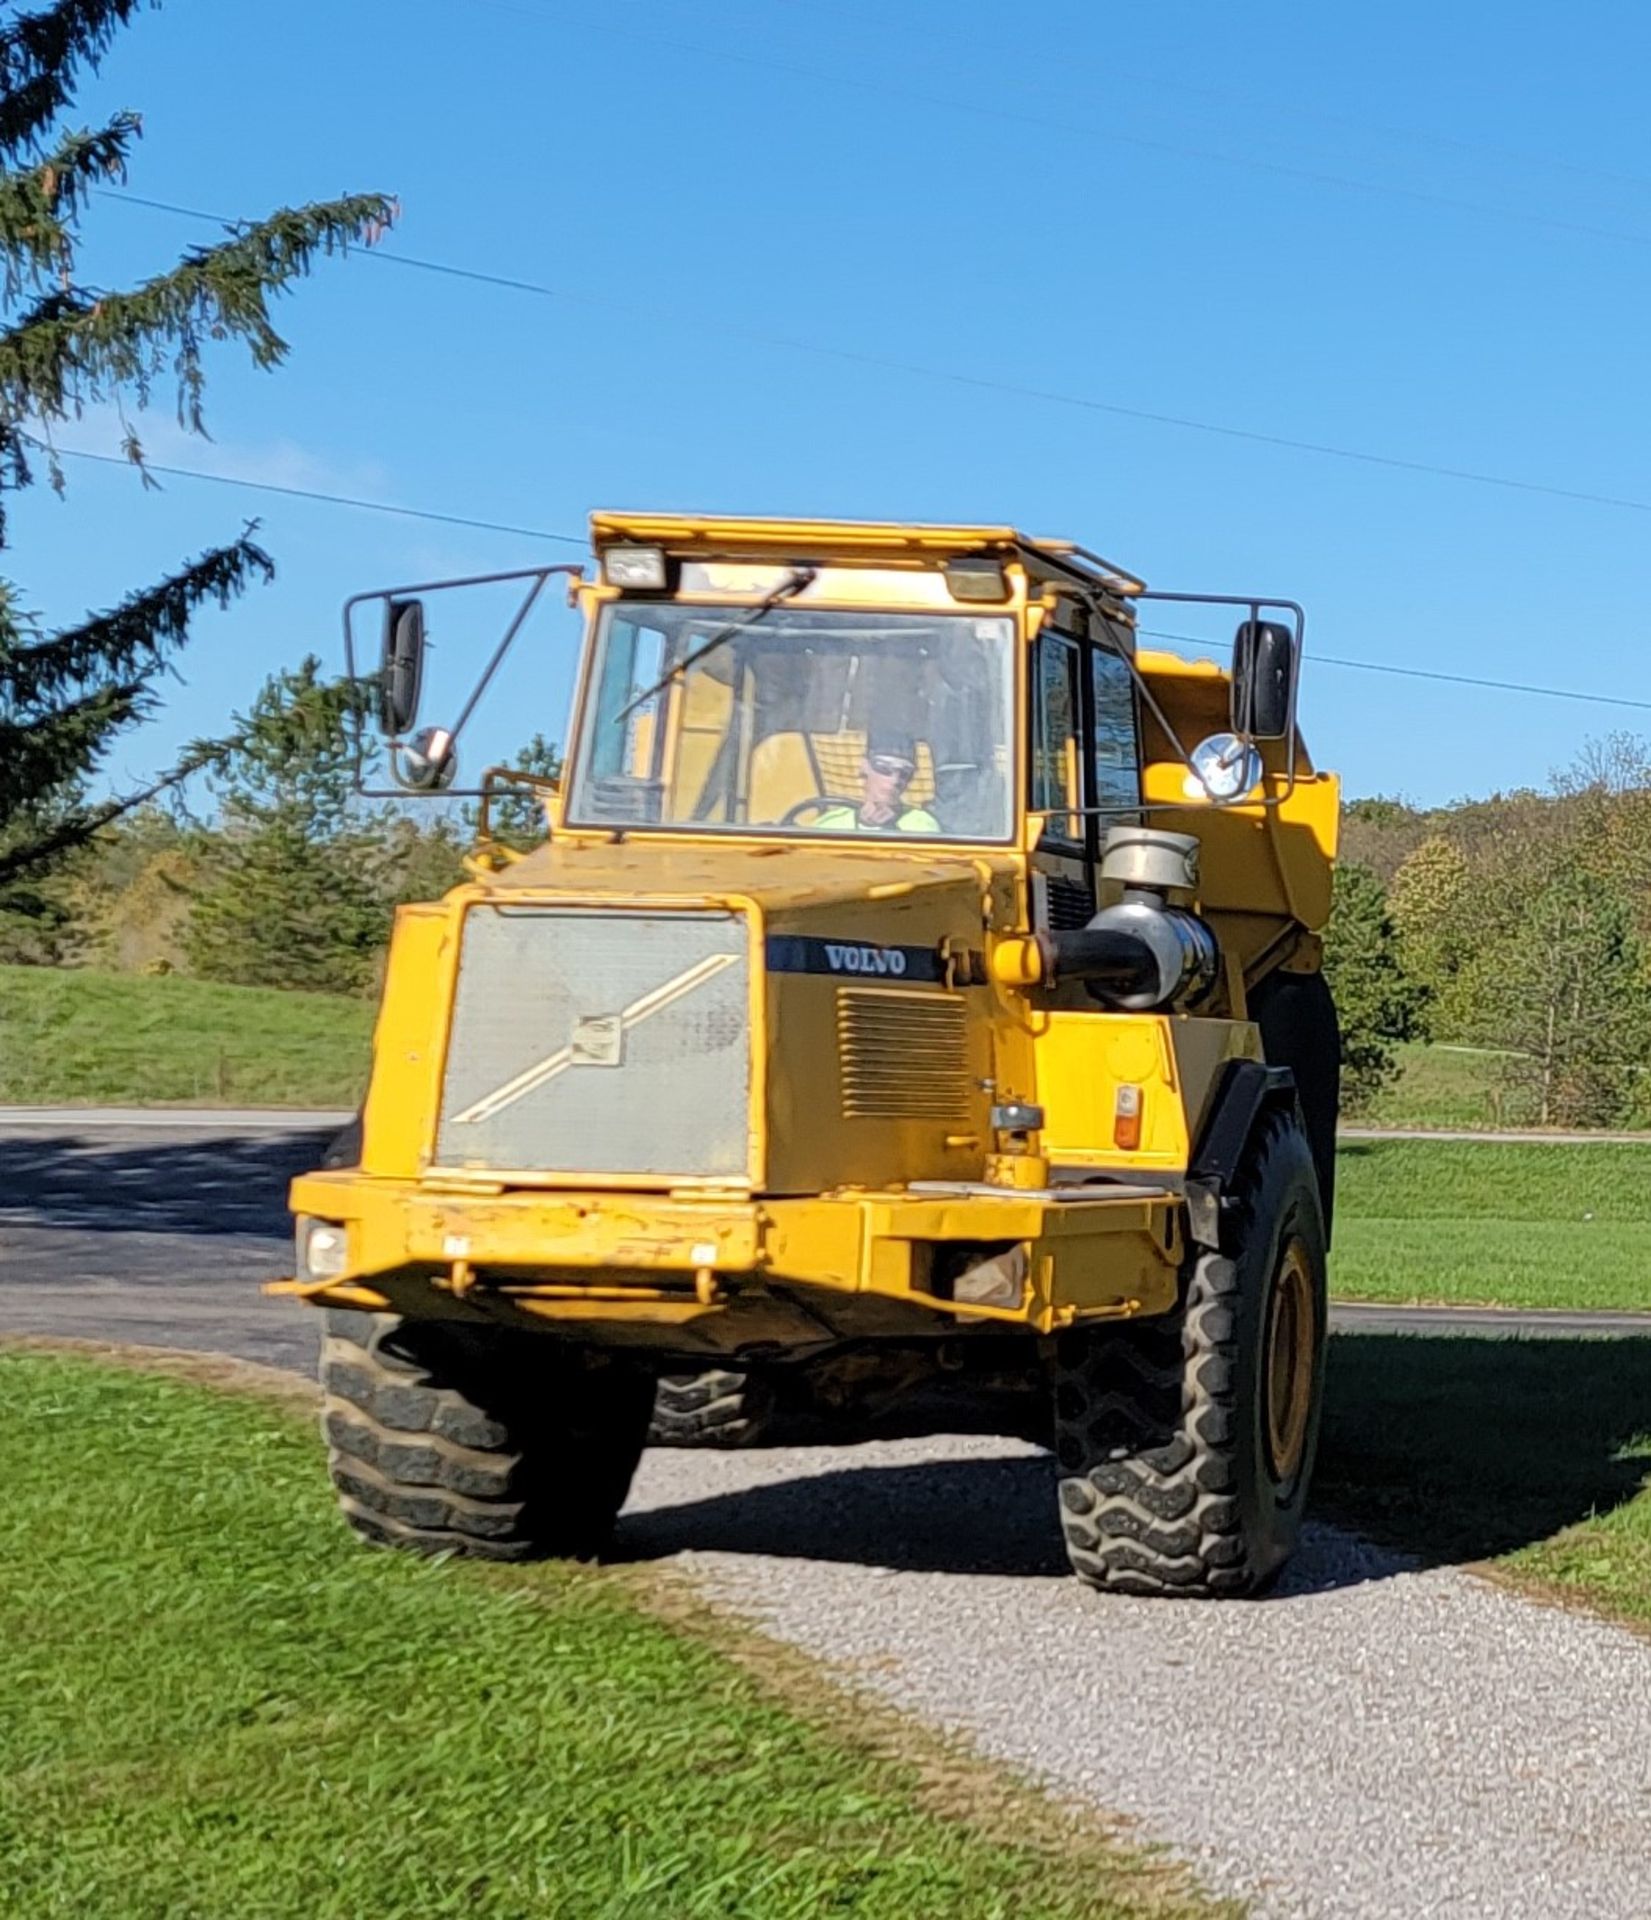 Volvo A25C 6x6 Offroad Dump Truck, 30,519 Miles, 12,411 Hours, s/n 5350V61011 - Image 14 of 34